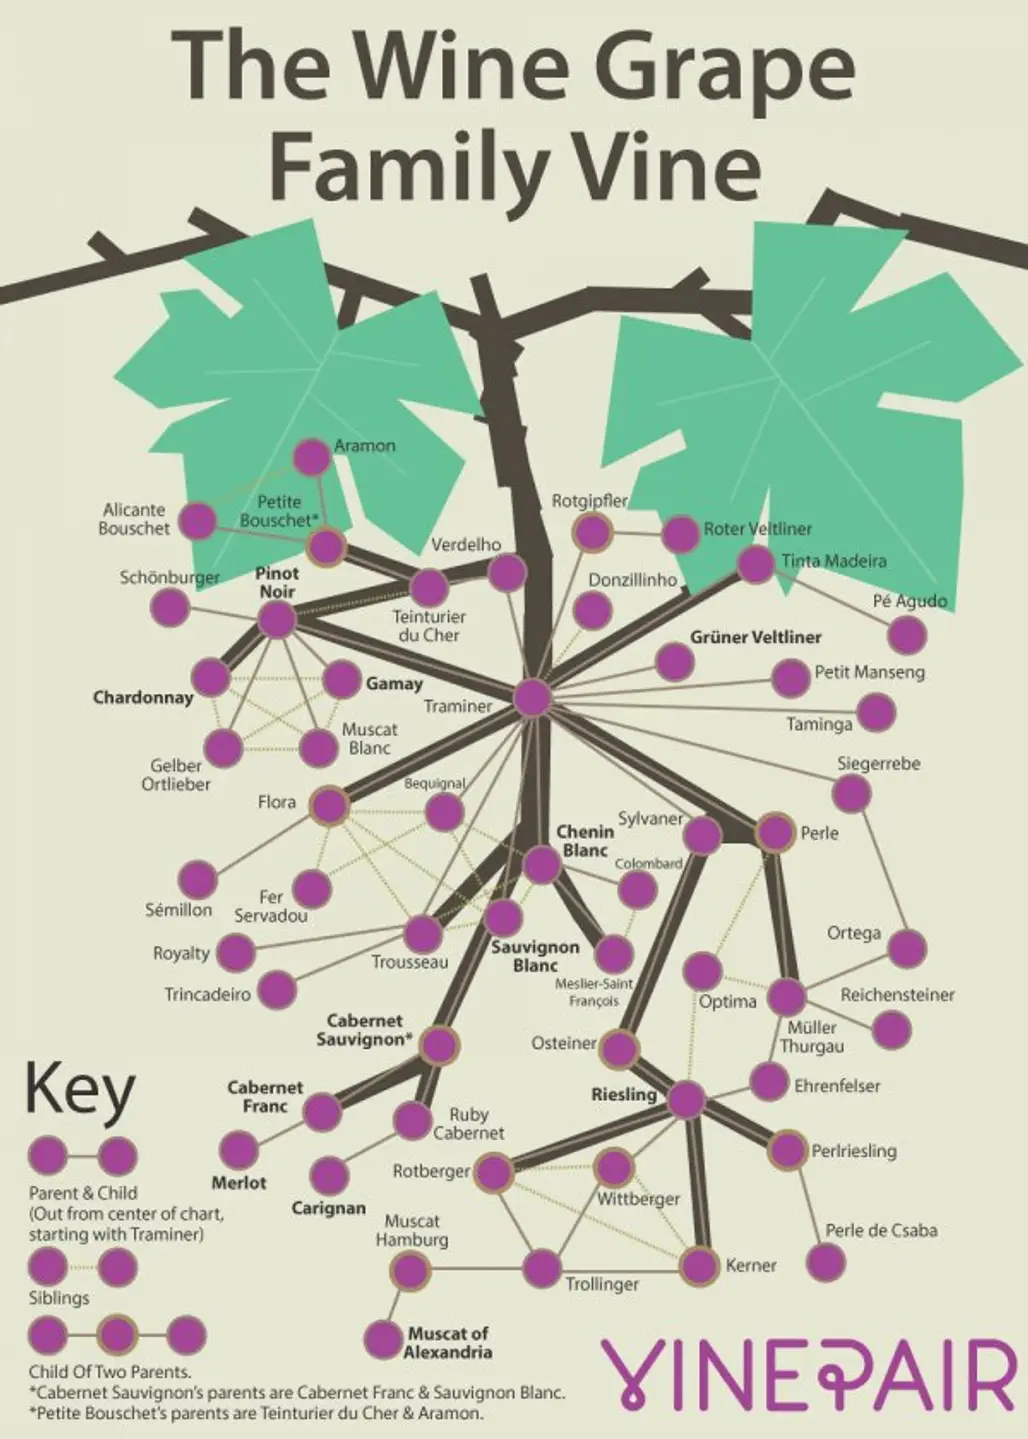 It's Kind of like a Family Tree, but for Wine